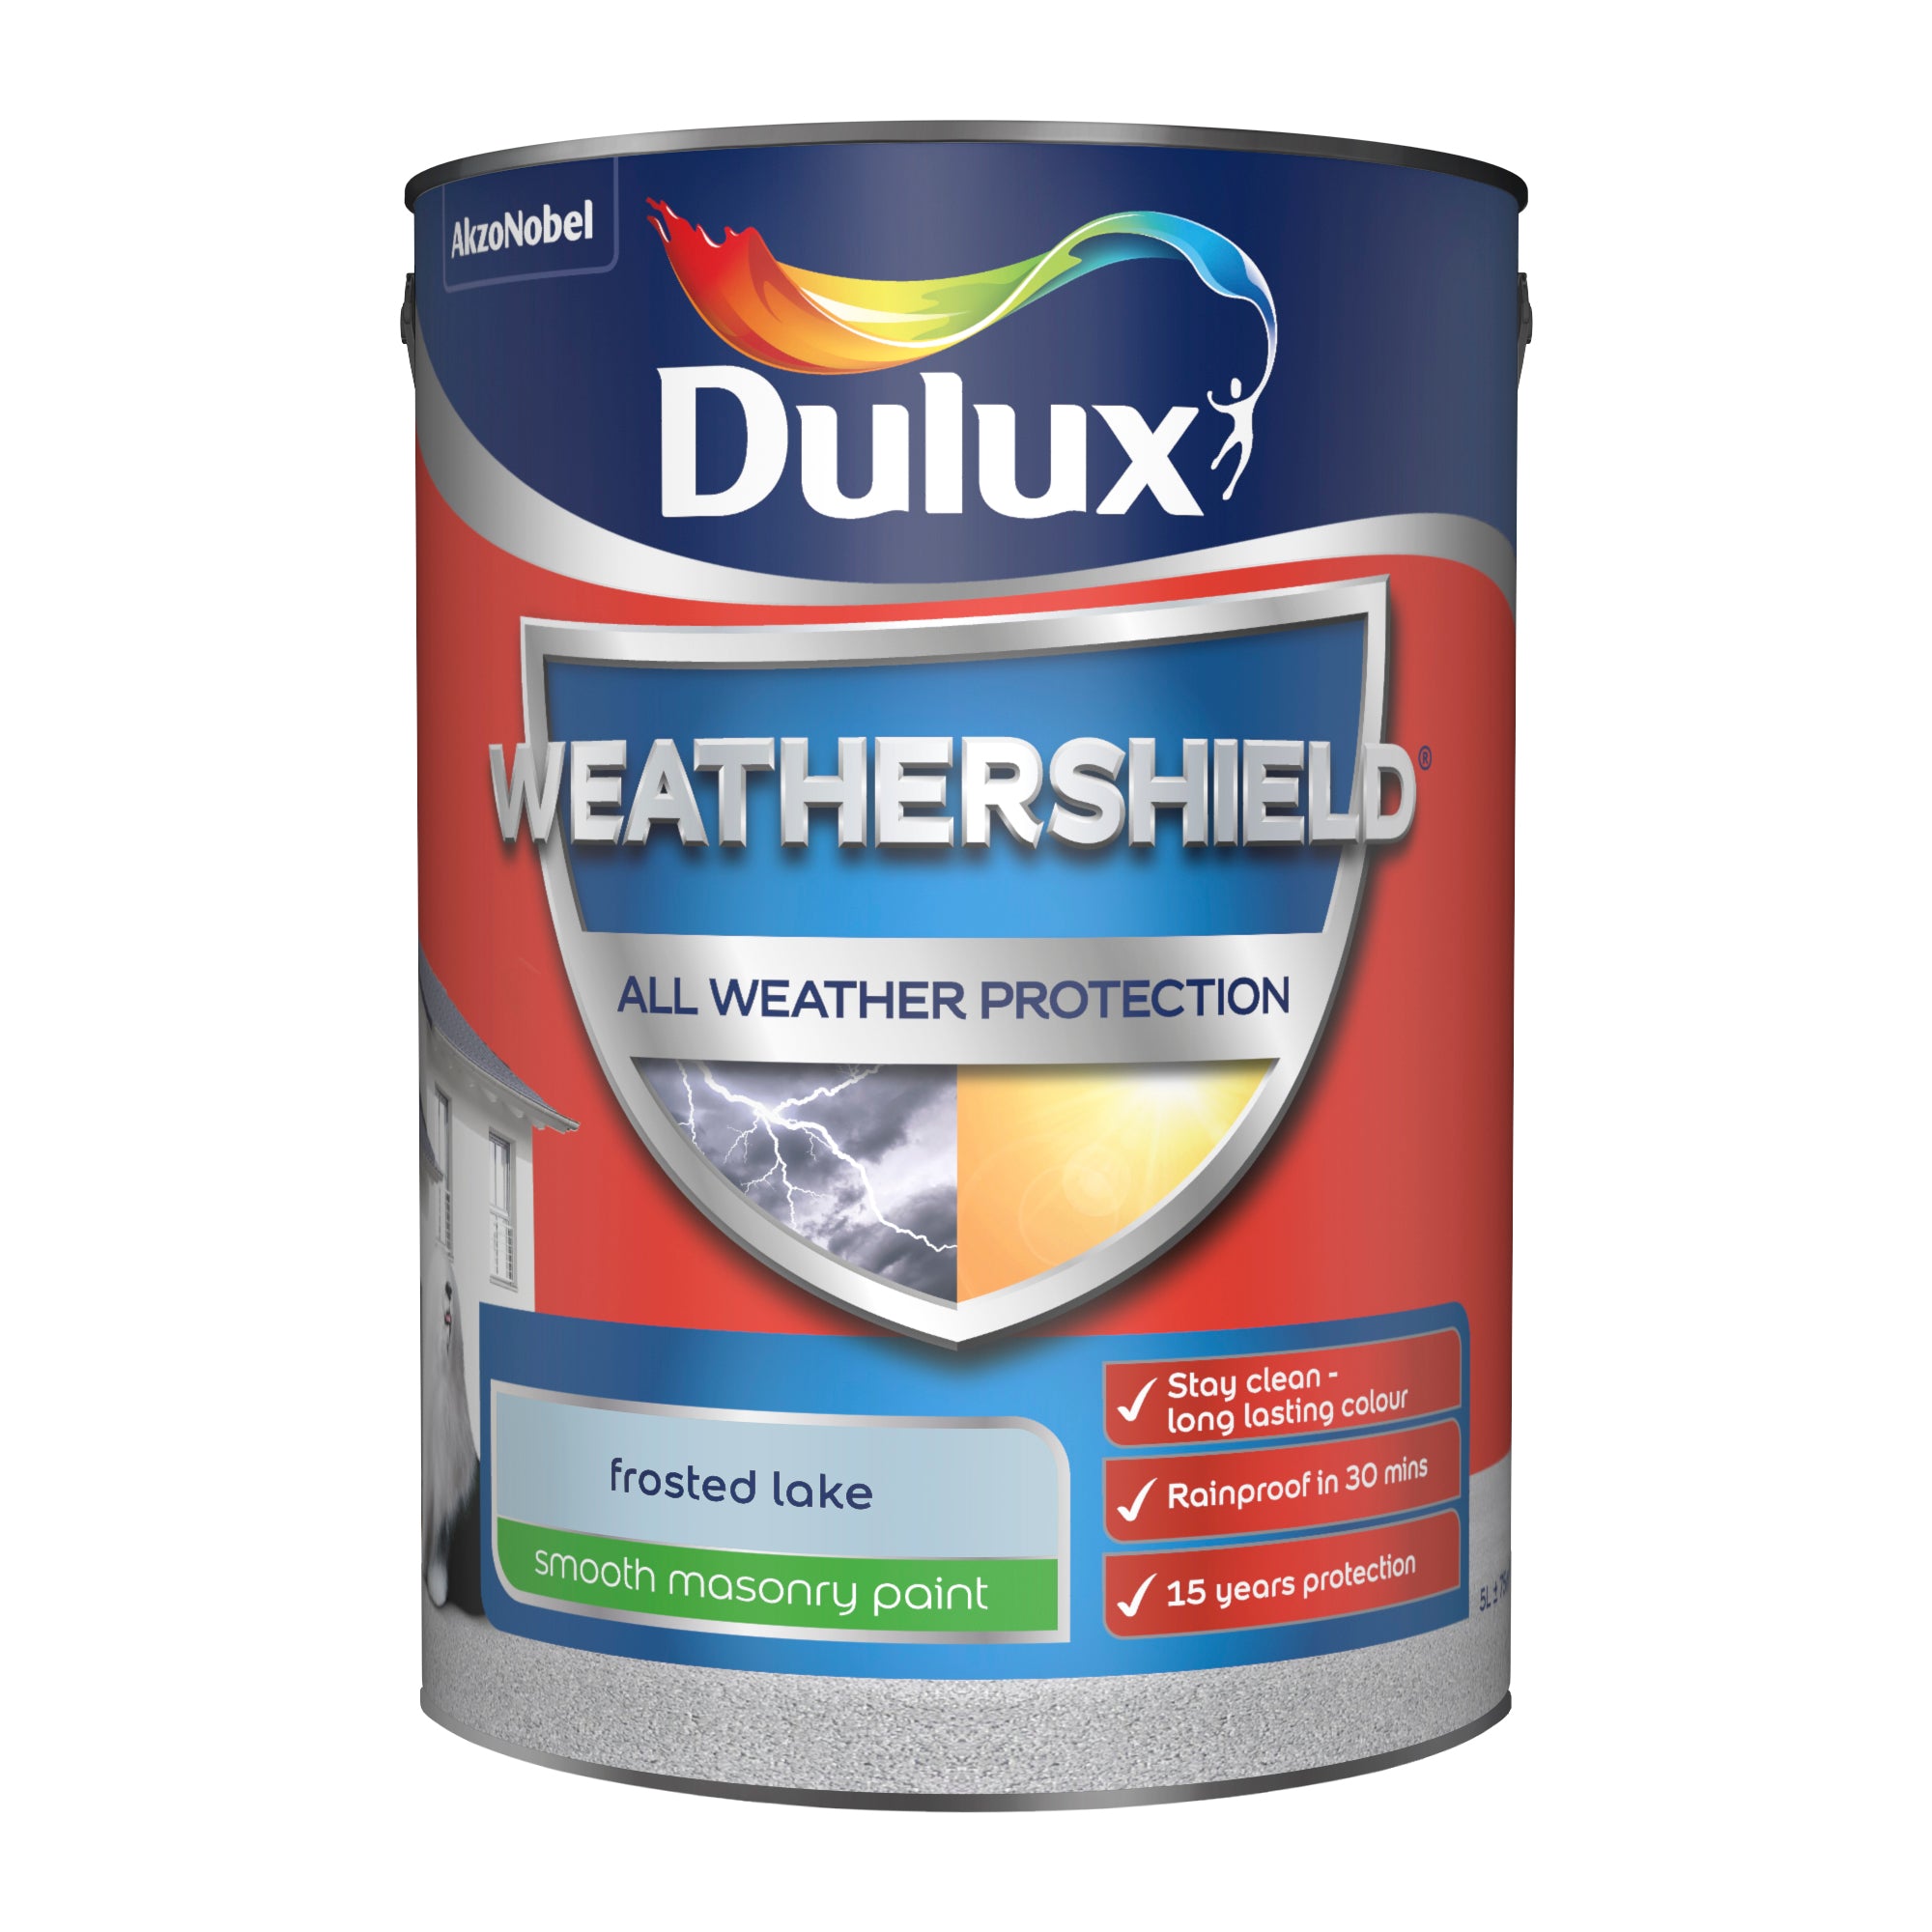 Dulux Weathershield All Weather Protection Smooth Frosted Lake 5L